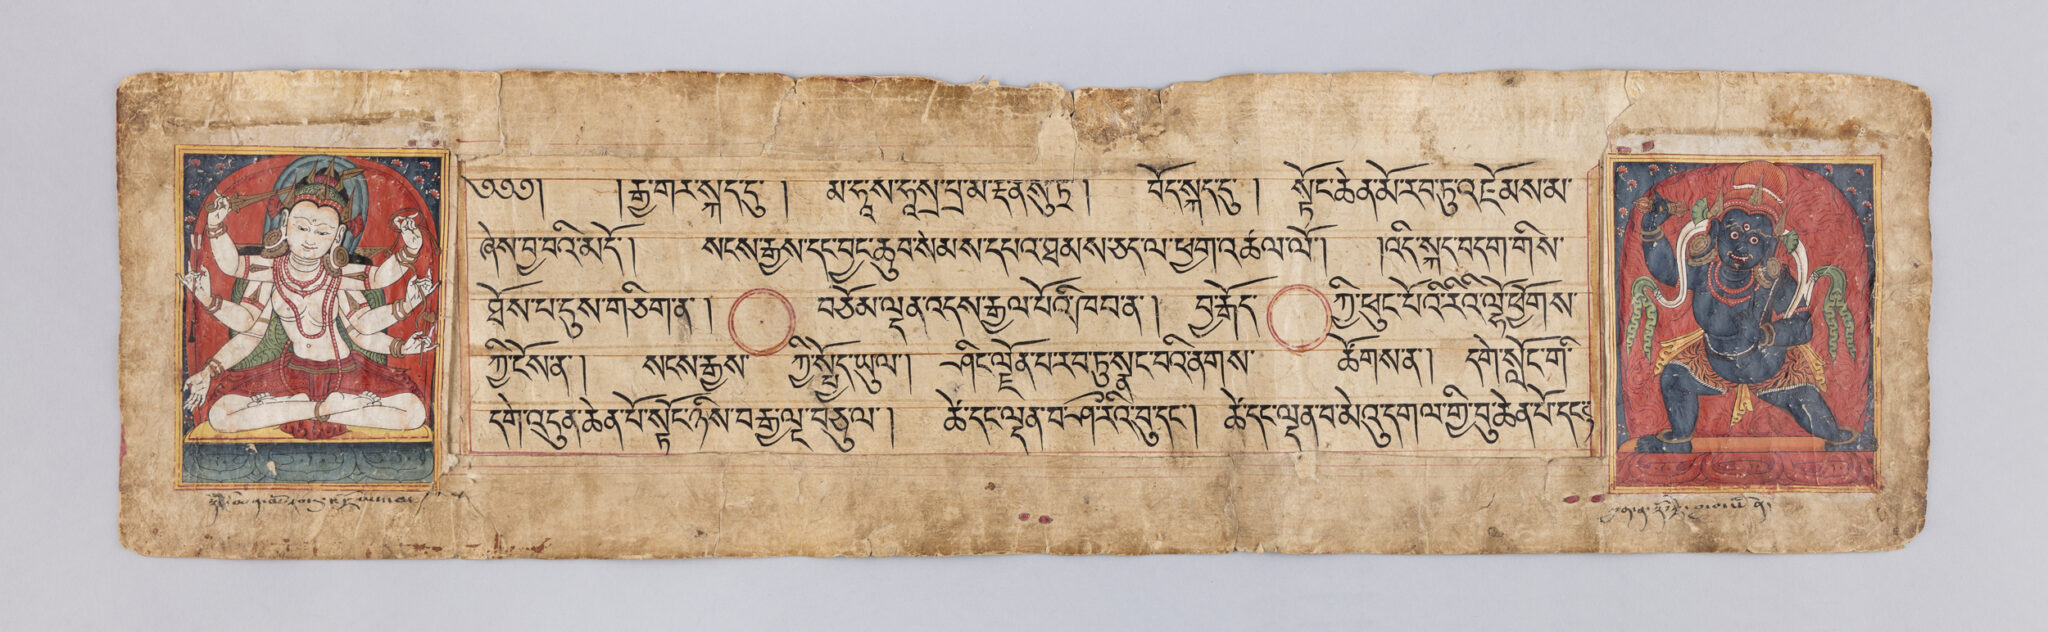 Rectangular page featuring Tibetan text at center flanked by two portraits: Bodhisattva at left; Wrathful deity at right